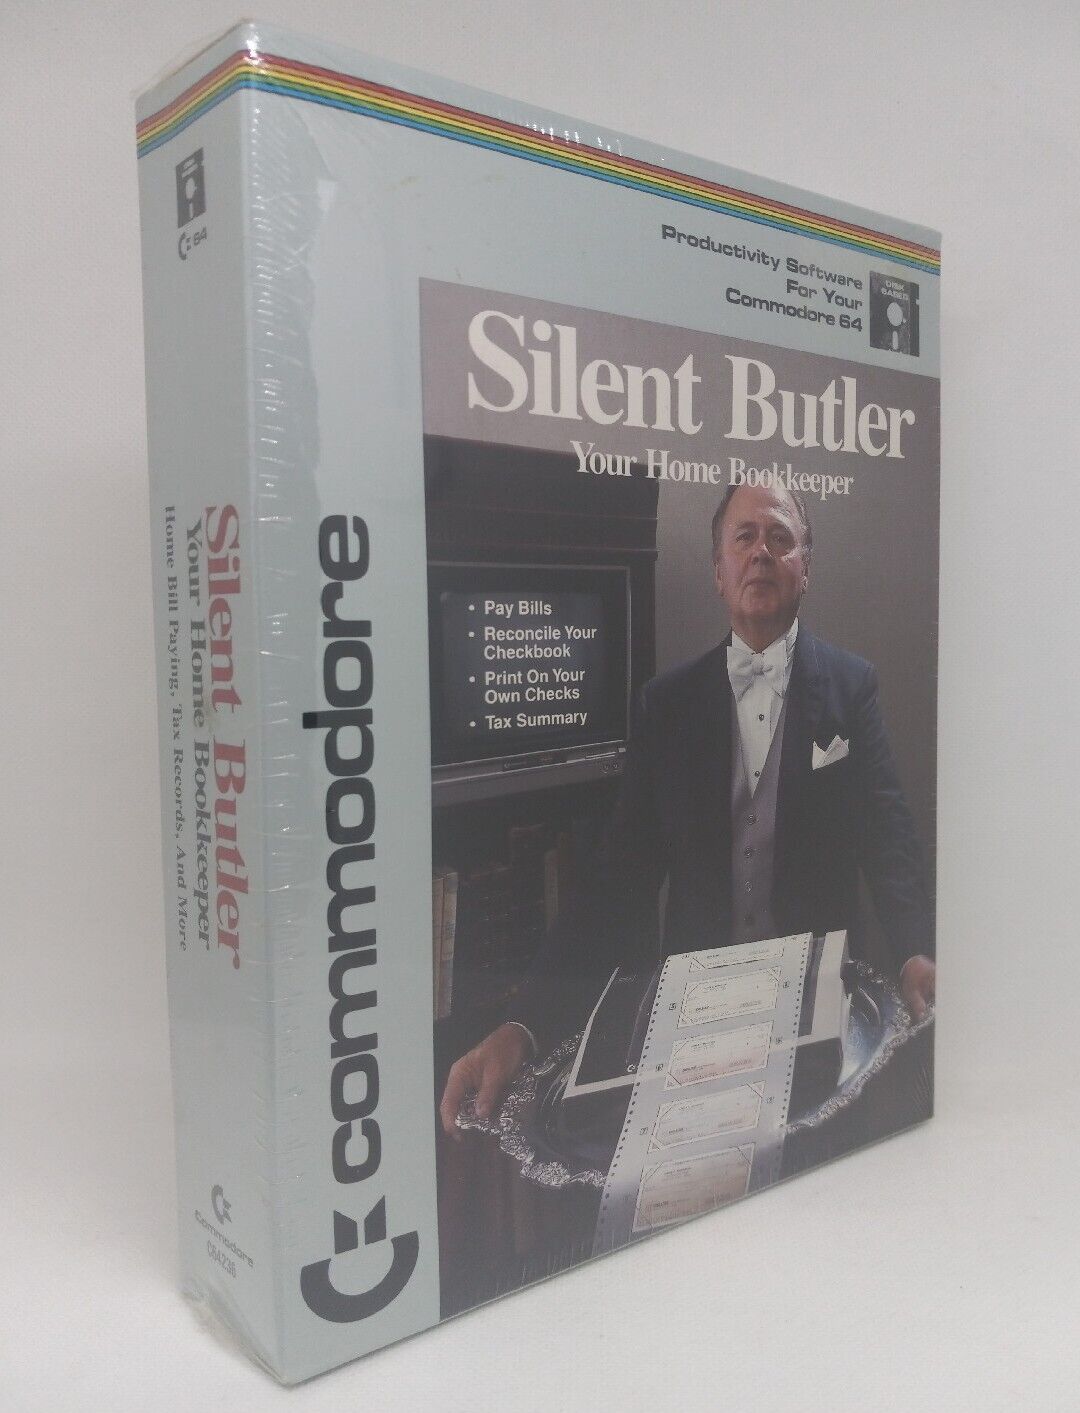 Commodore 64 - Silent Butler: Your Home Bookkeeper * Brand New & Sealed VTG 1984